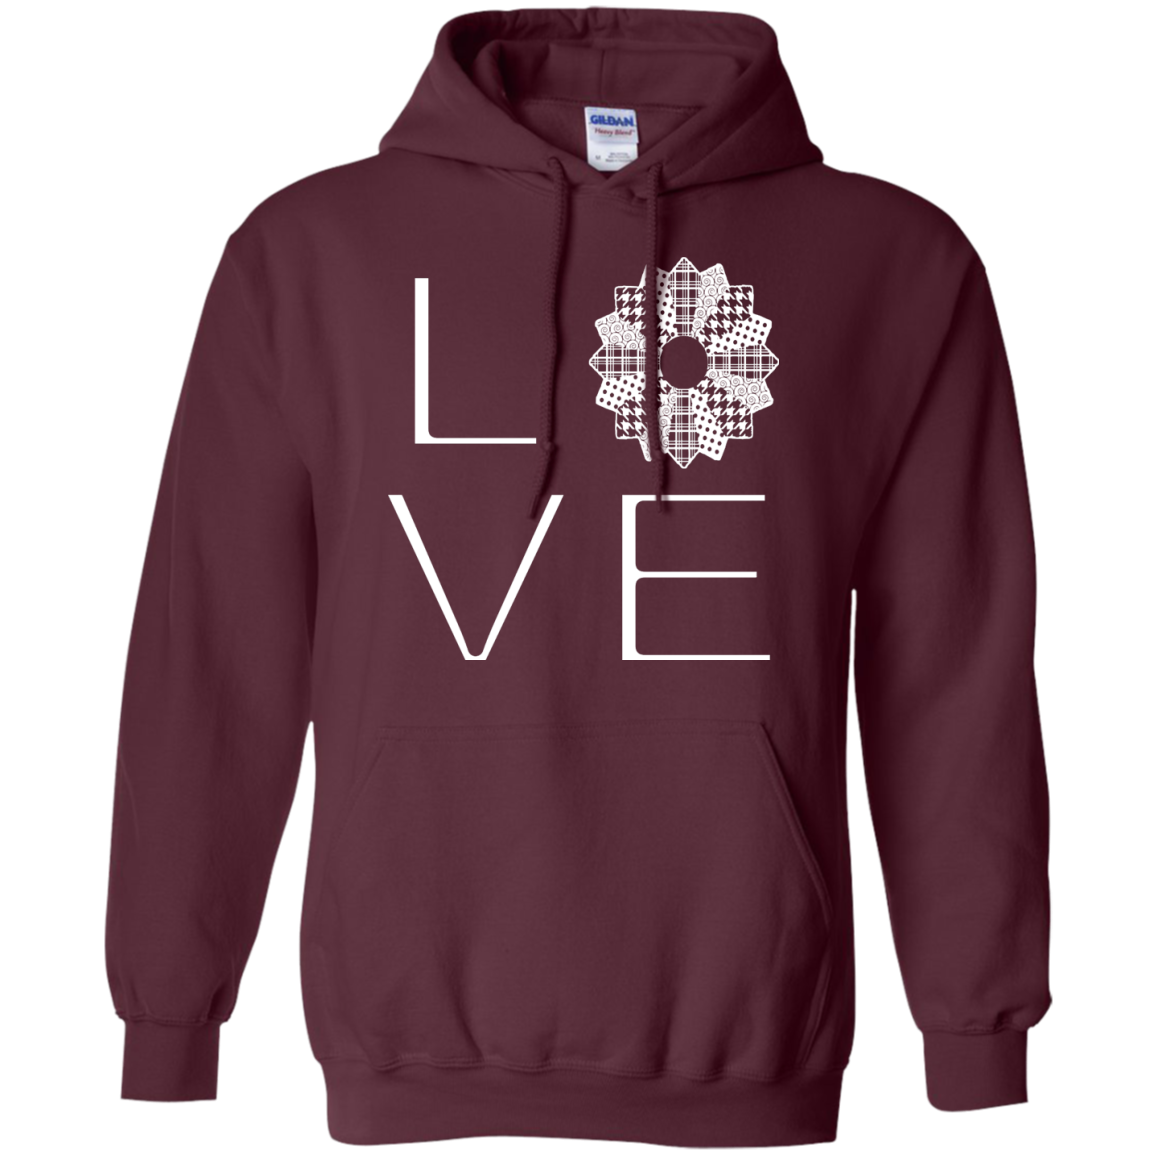 LOVE Quilting Pullover Hoodies - Crafter4Life - 11